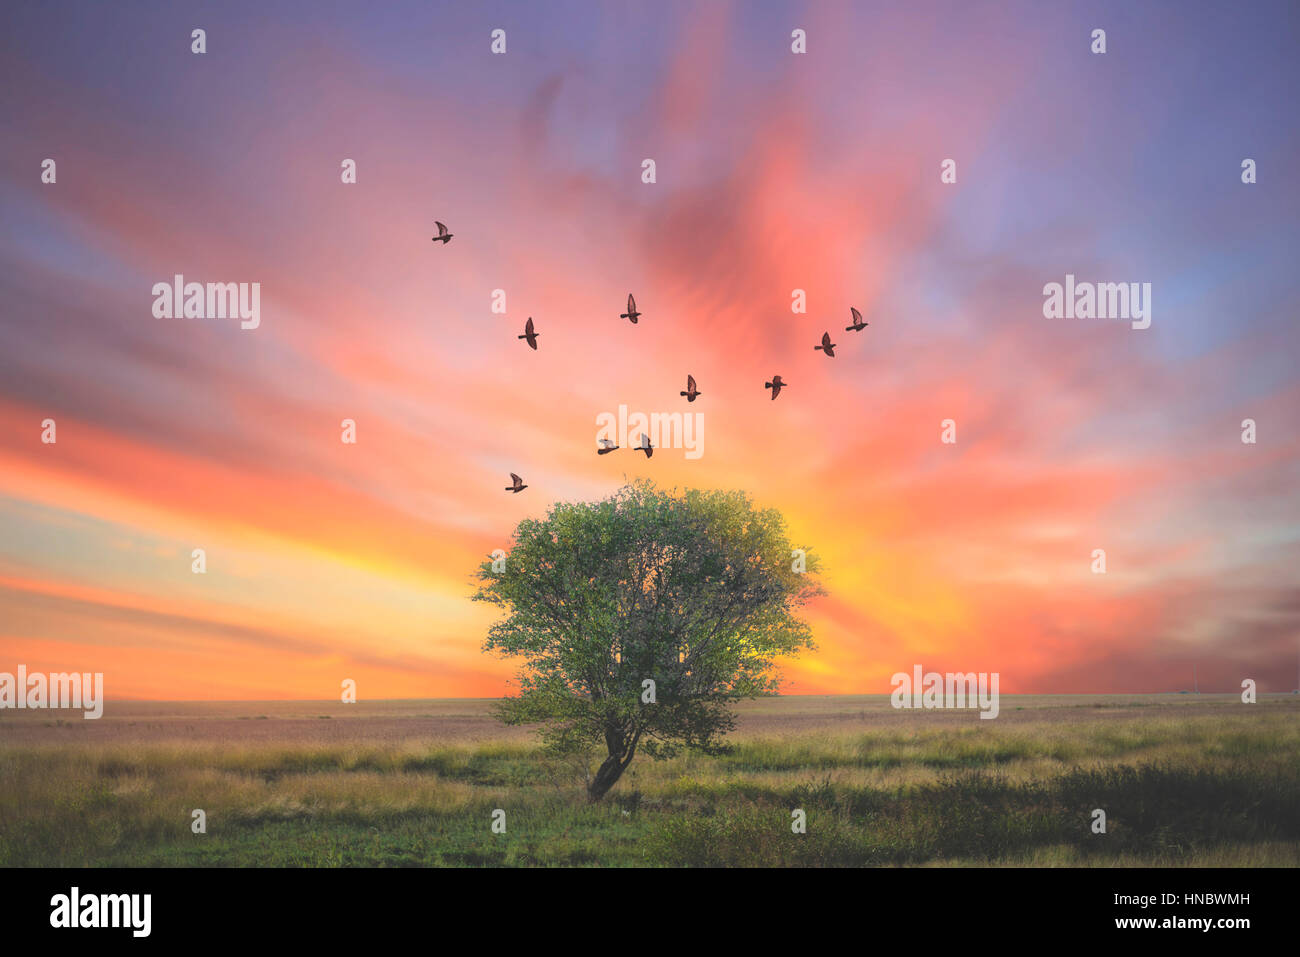 Birds flying over tree at sunset, Plainview, Texas, United States Stock Photo